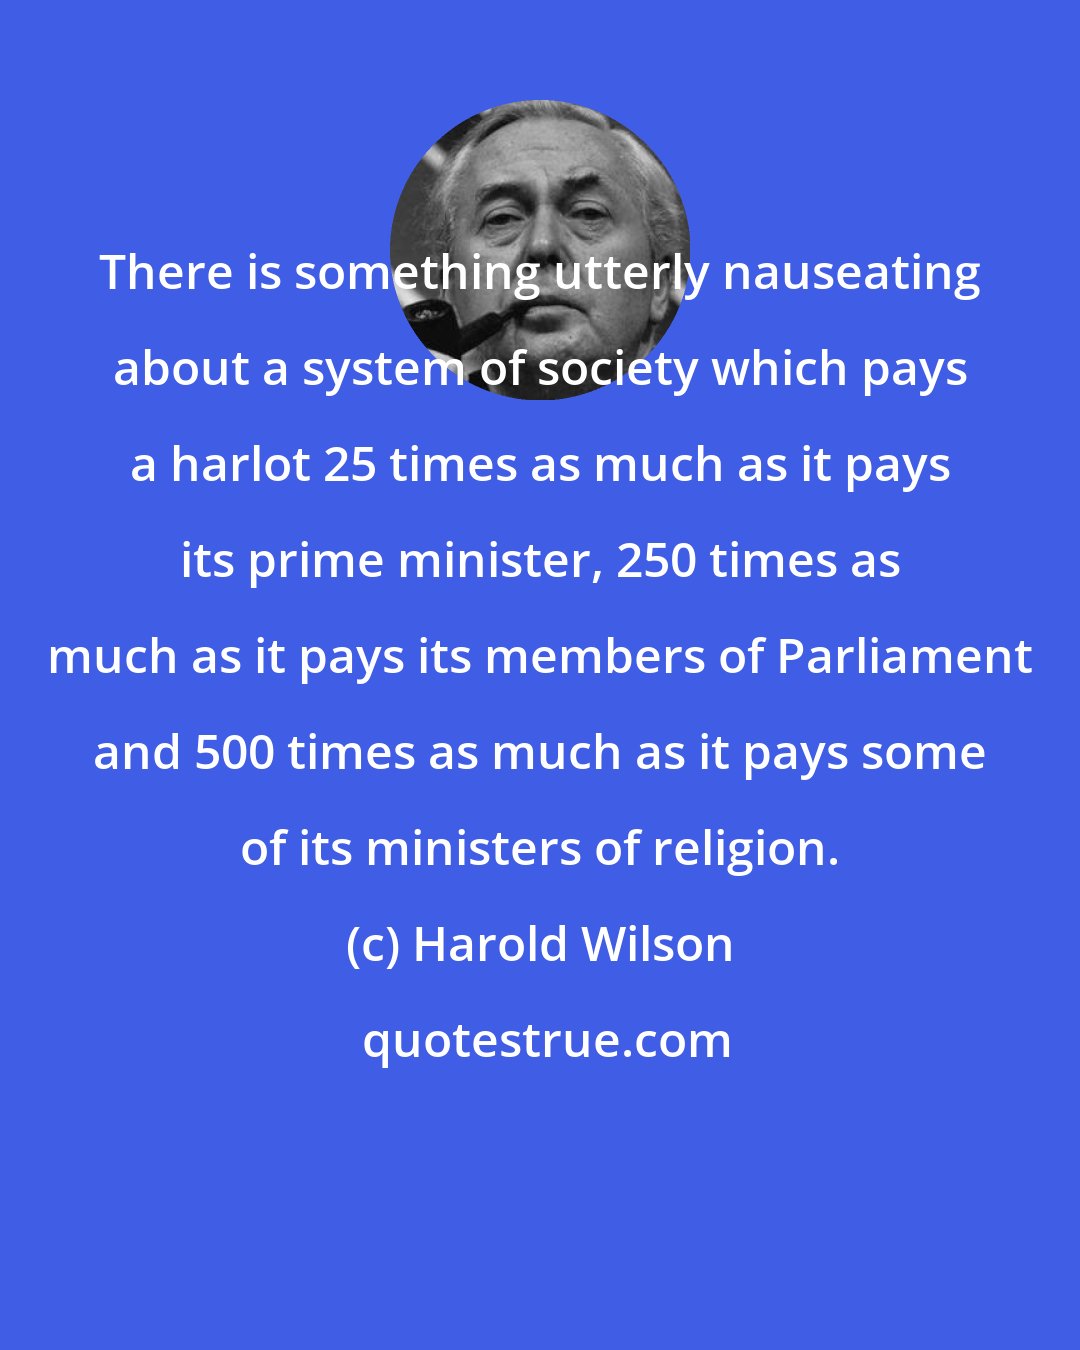 Harold Wilson: There is something utterly nauseating about a system of society which pays a harlot 25 times as much as it pays its prime minister, 250 times as much as it pays its members of Parliament and 500 times as much as it pays some of its ministers of religion.